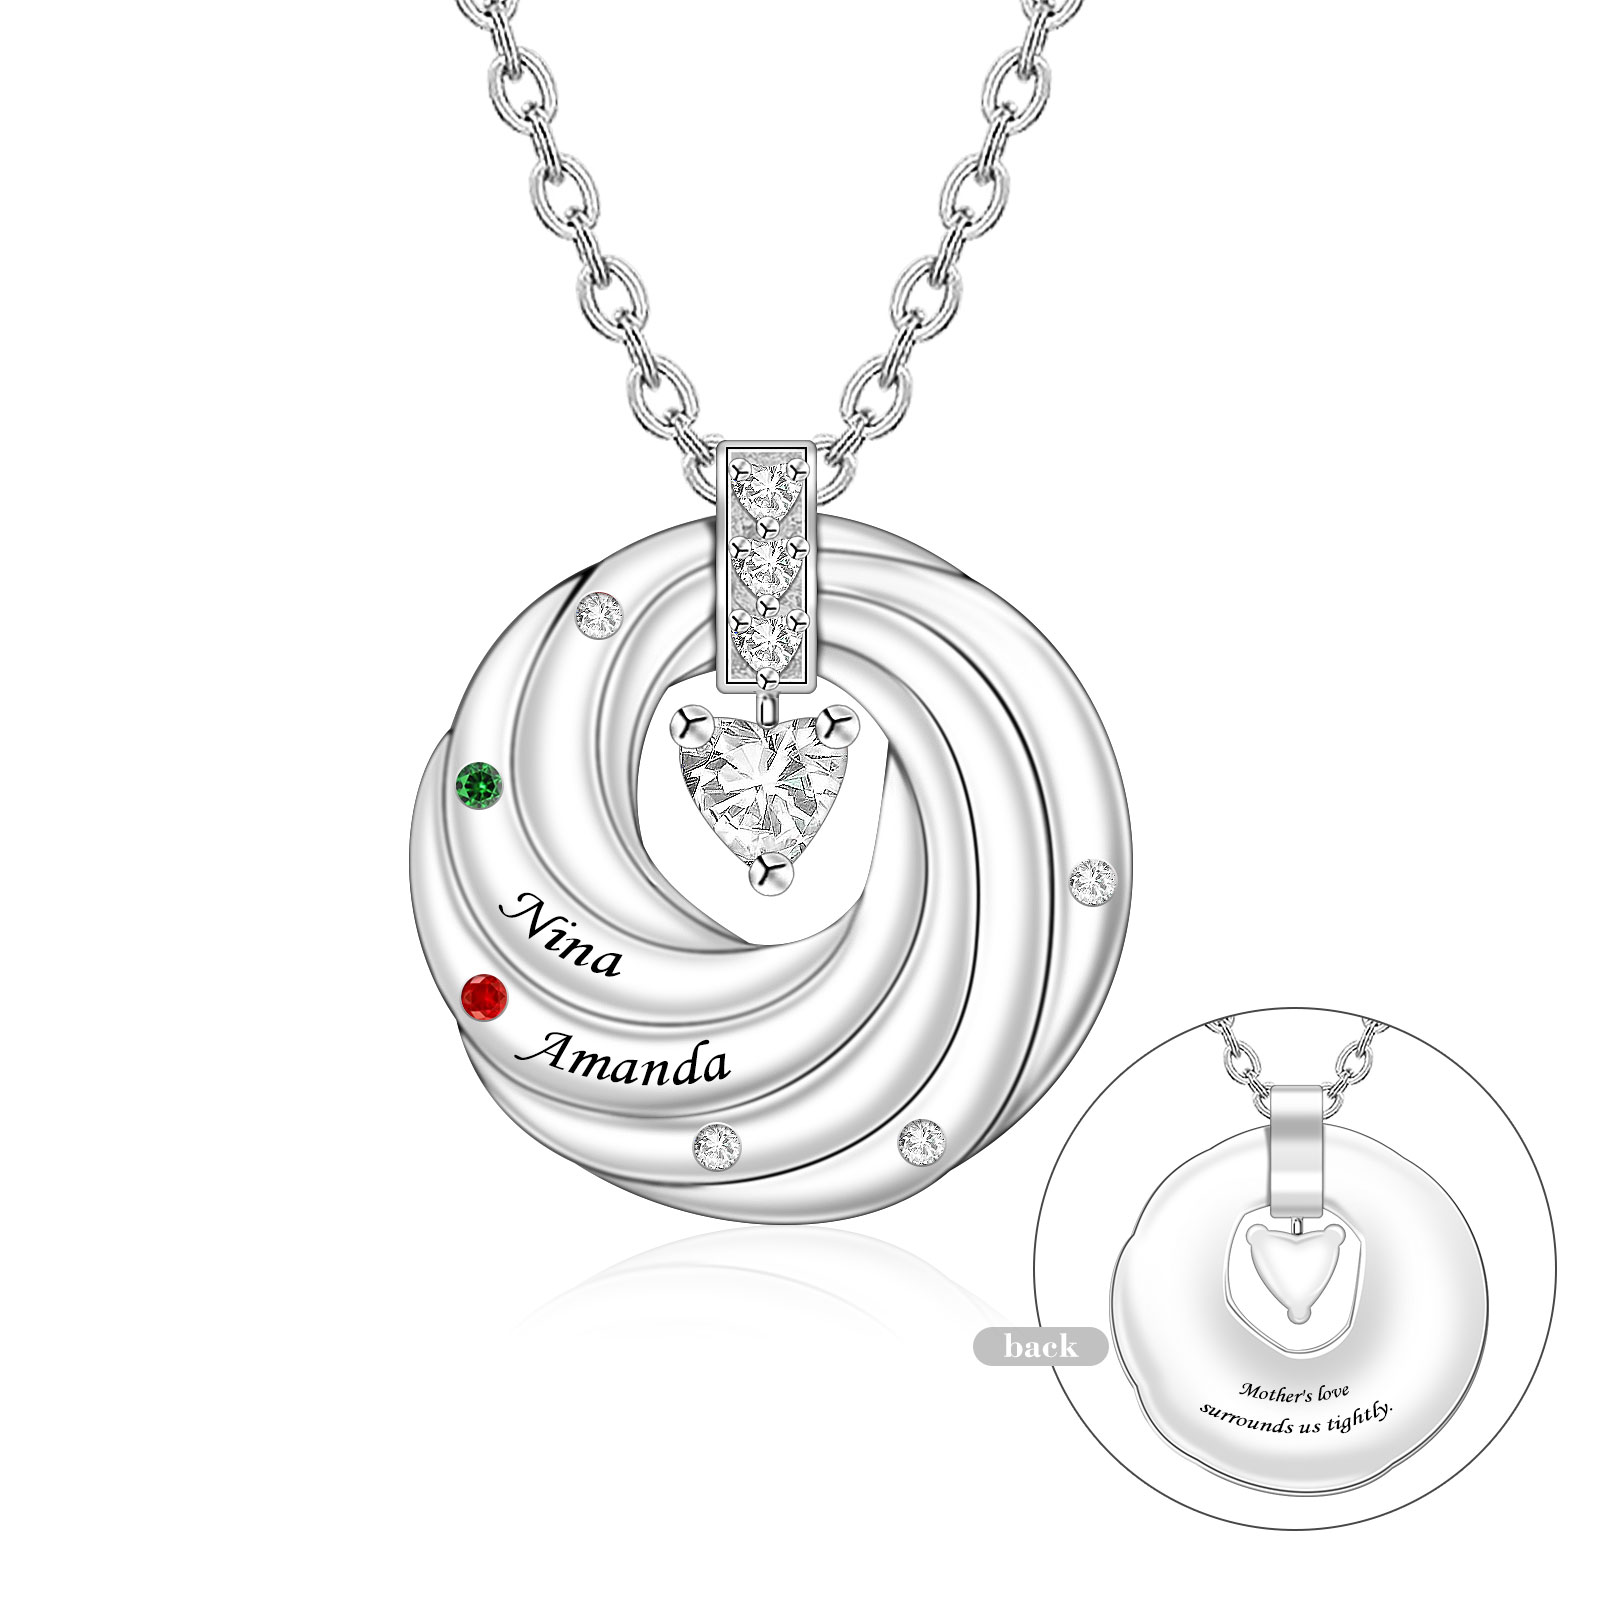 NL13-1-2 Personalized Family Tree Necklace with Birthstones and Engraved Names